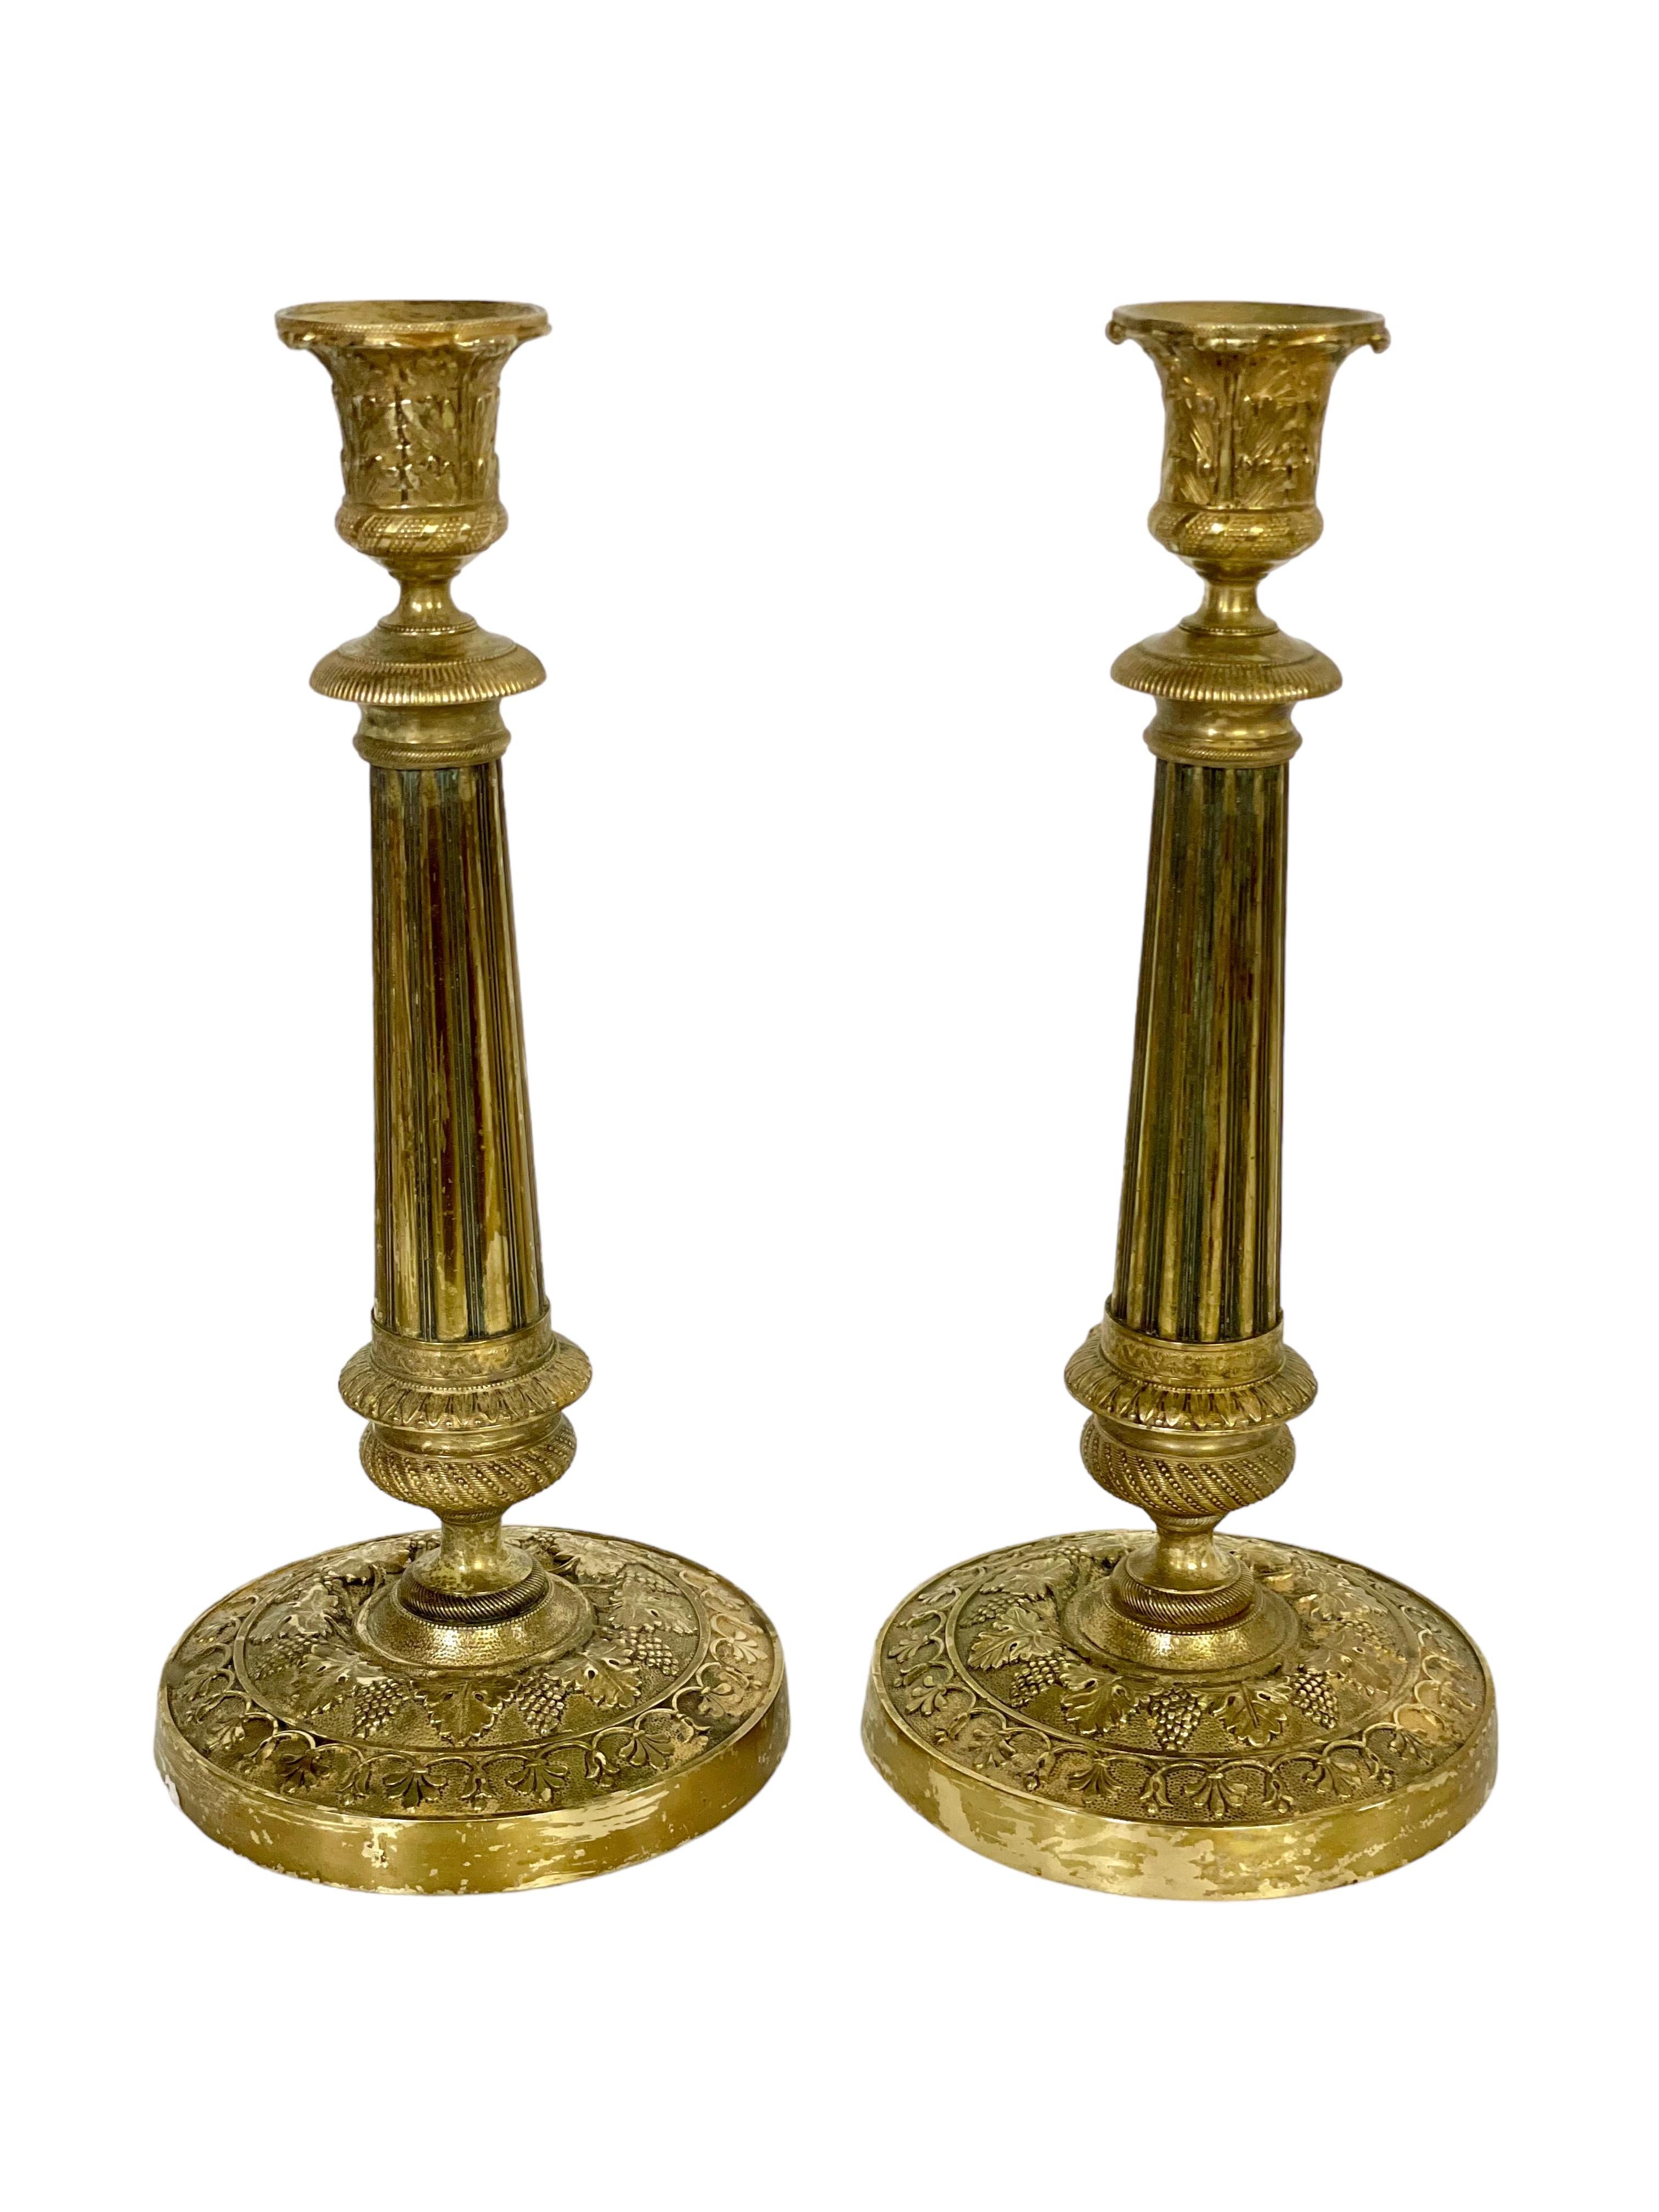 Pair of Gilt Bronze Neoclassical Candlesticks 19th Century For Sale 1